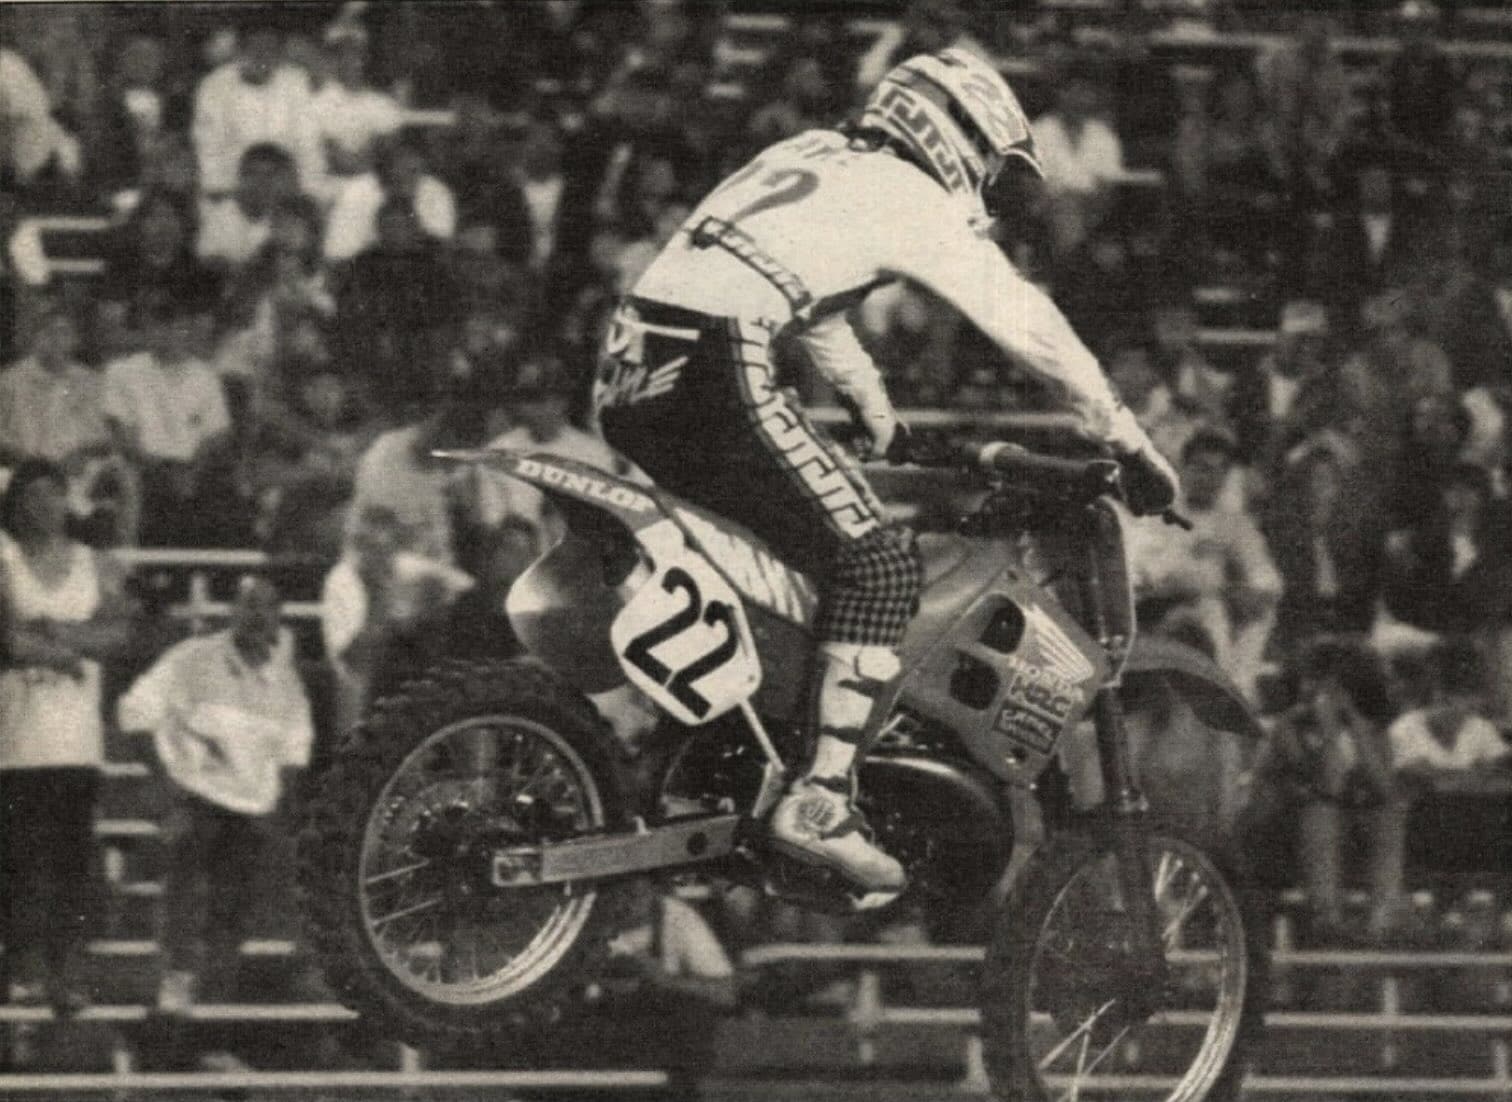 Jean-Michel Bayle won the 1990 Foxborough Supercross. Cycle News Archives